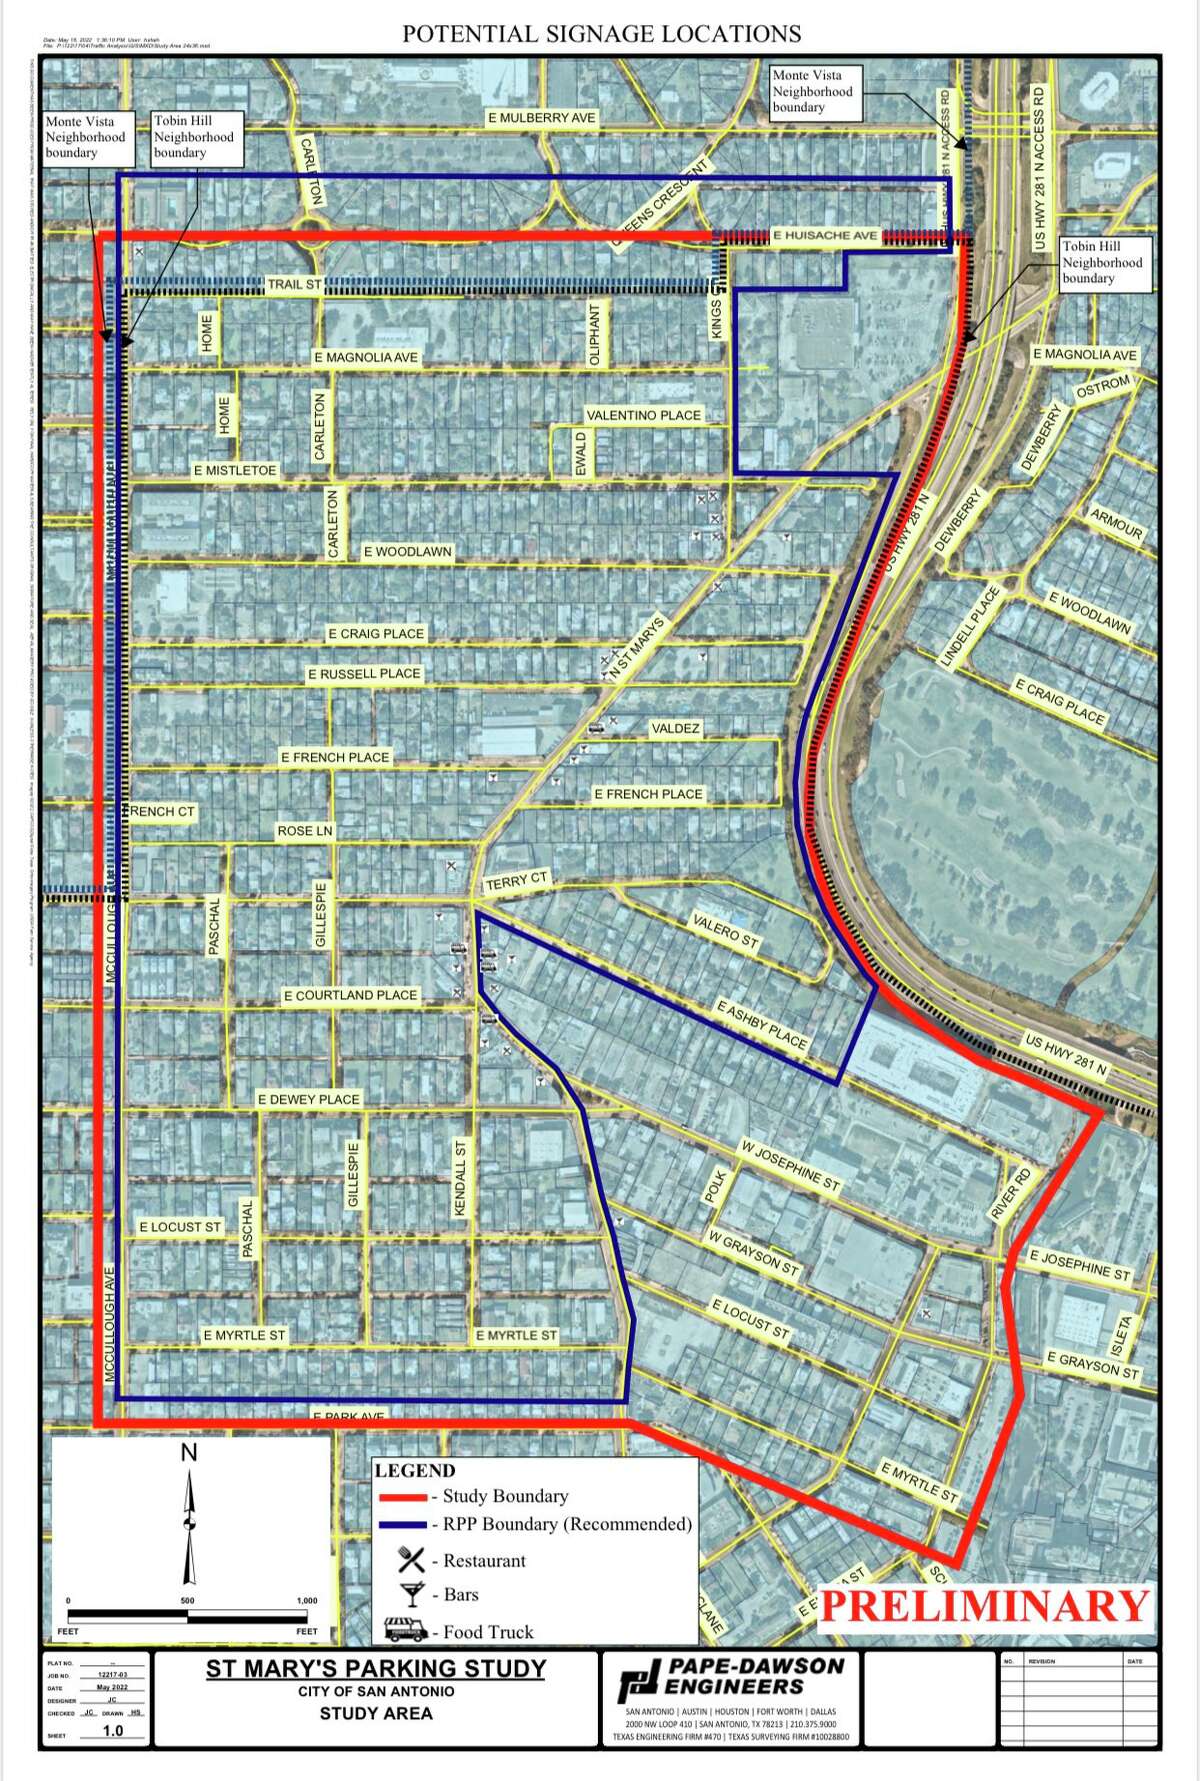 This map tweeted out by Councilman Mario Bravo shows the proposed area and streets that will be affected.